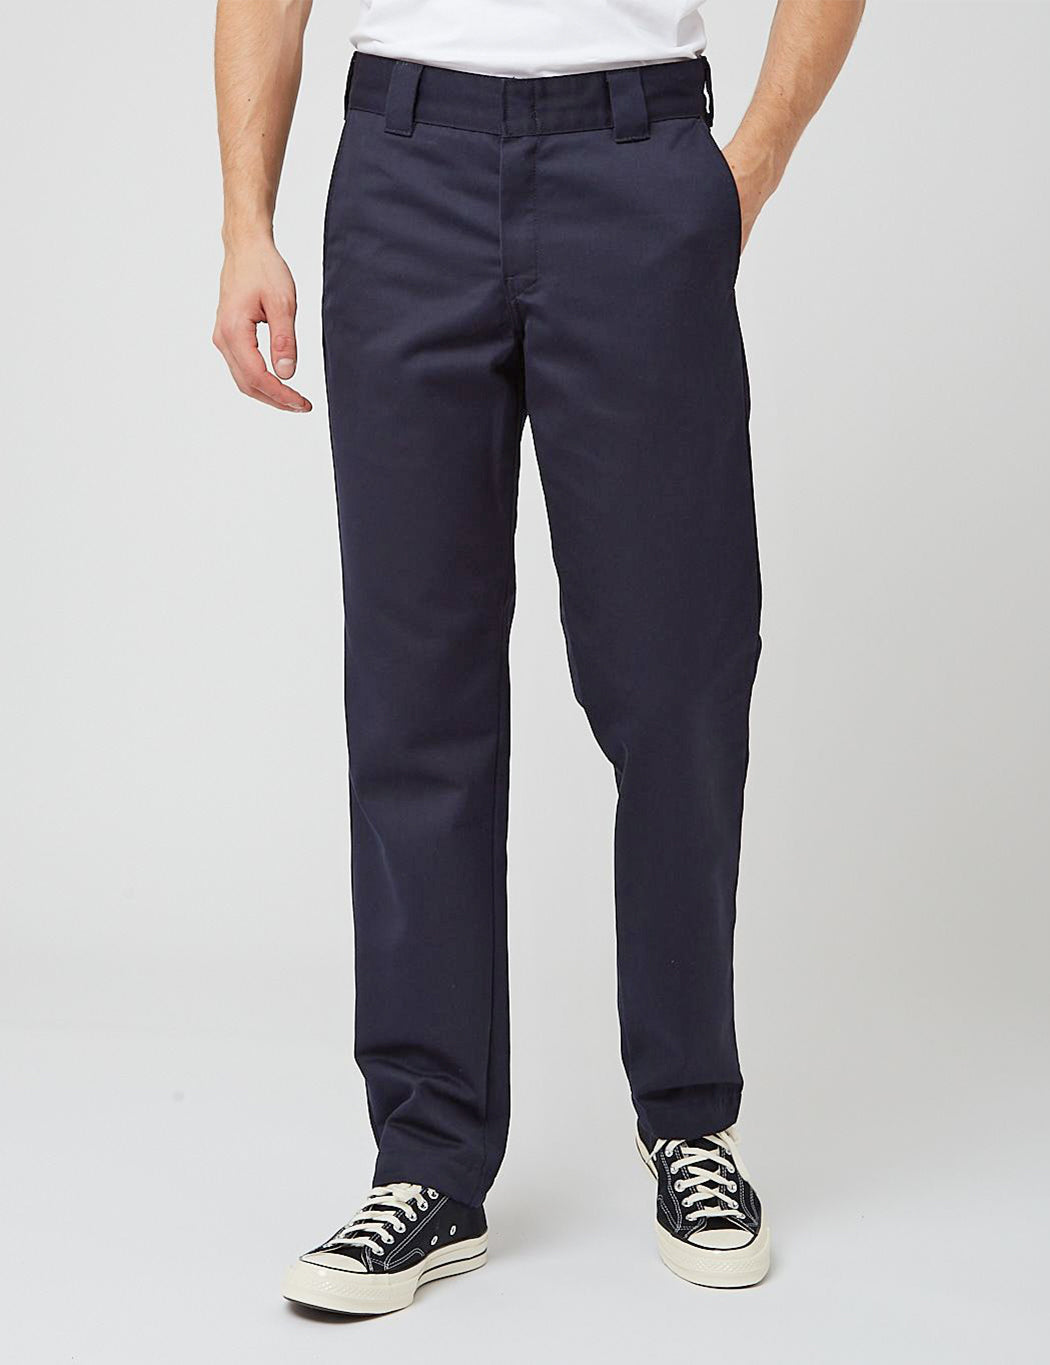 Carhartt-WIP Master Pant (Relaxed) - Dark Navy Blue I URBAN EXCESS.